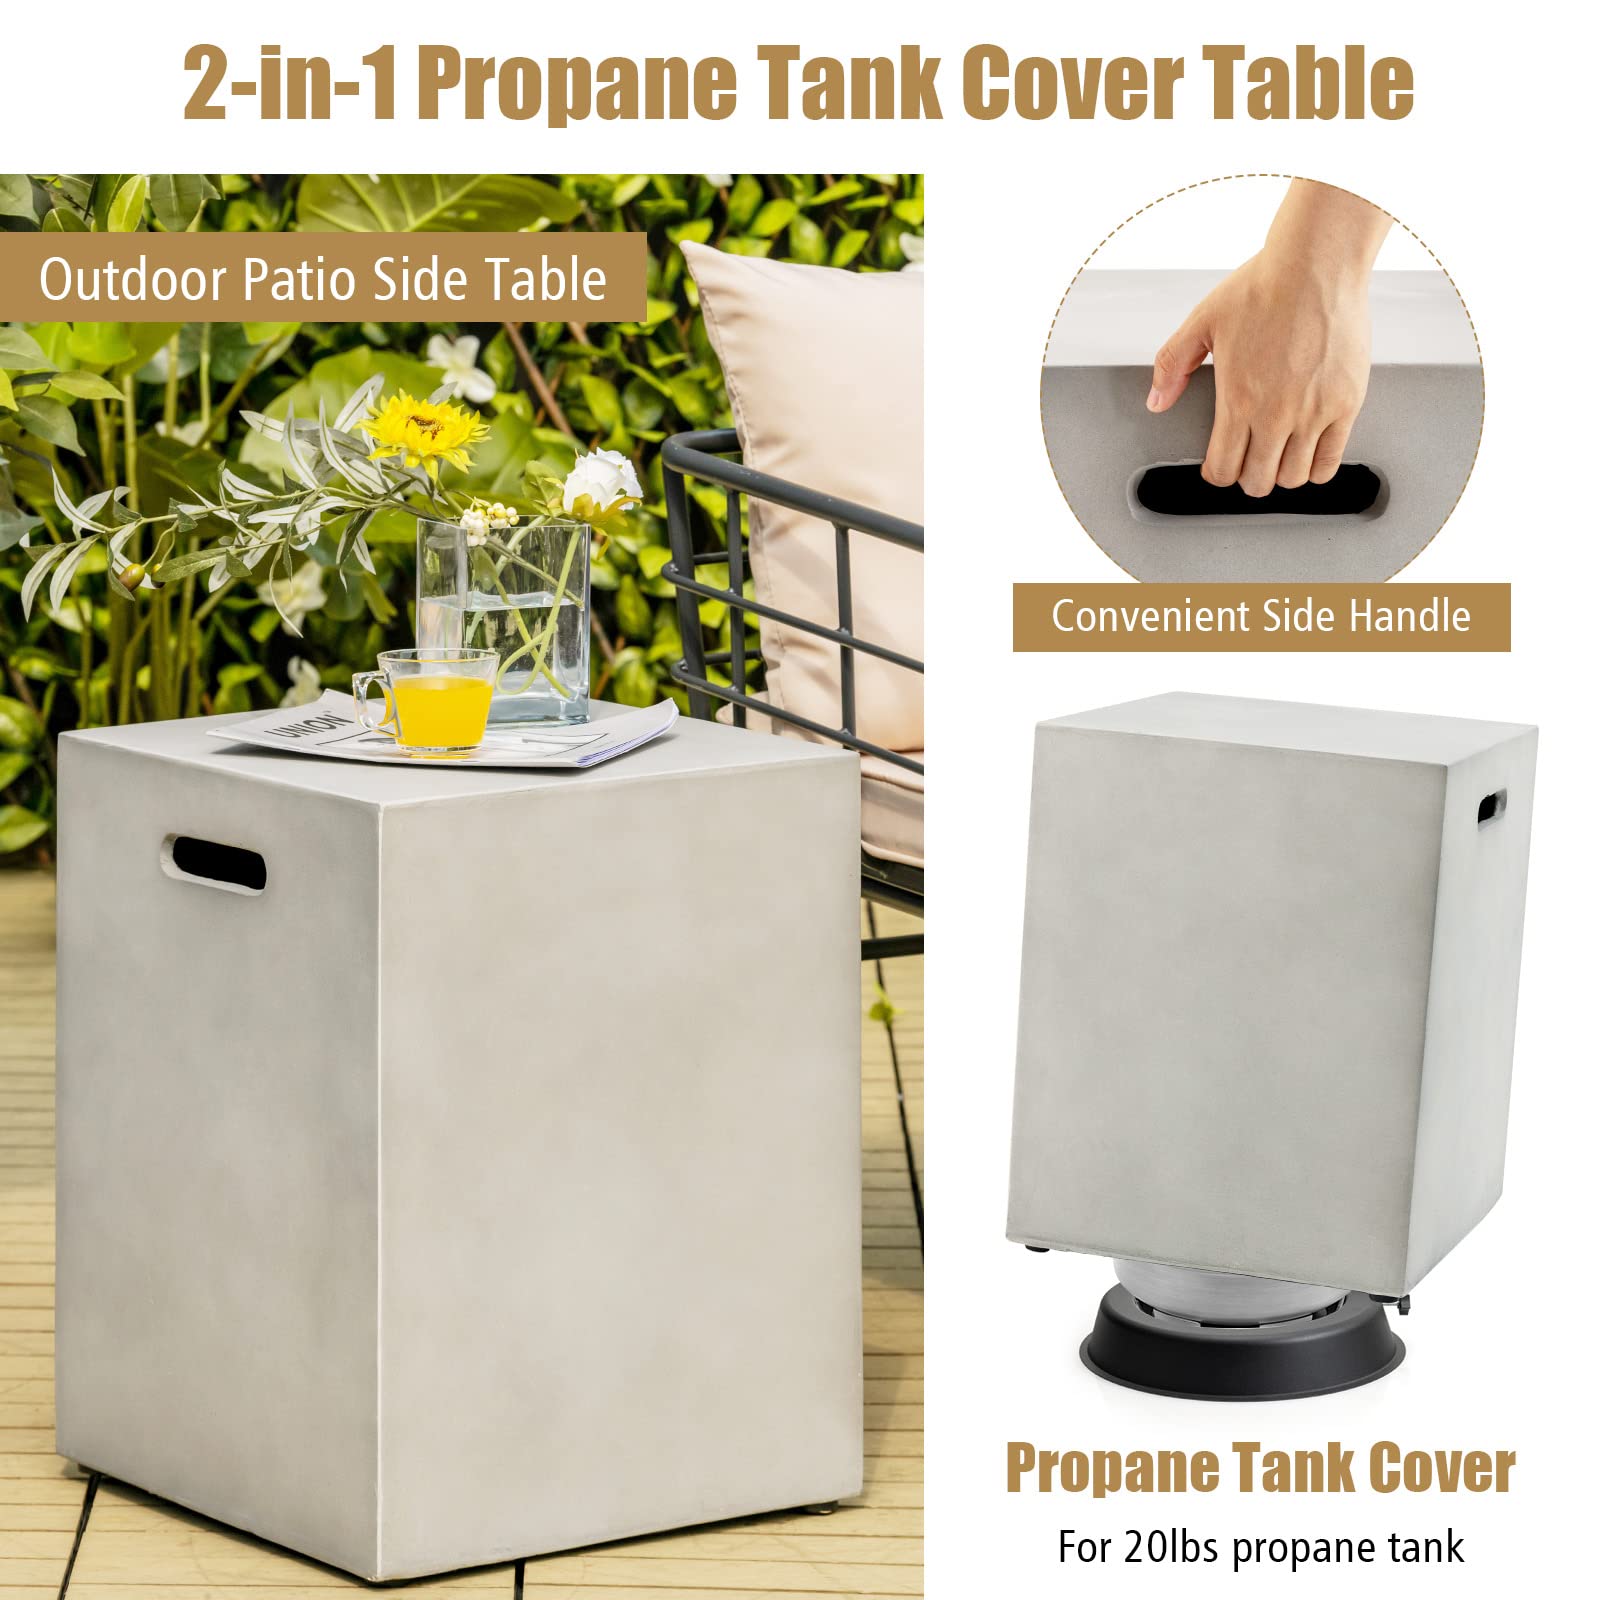 Giantex Propane Tank Cover Table - Hideaway Table, Outdoor 20 lbs Propane Tank Holder with Handles on Both Sides